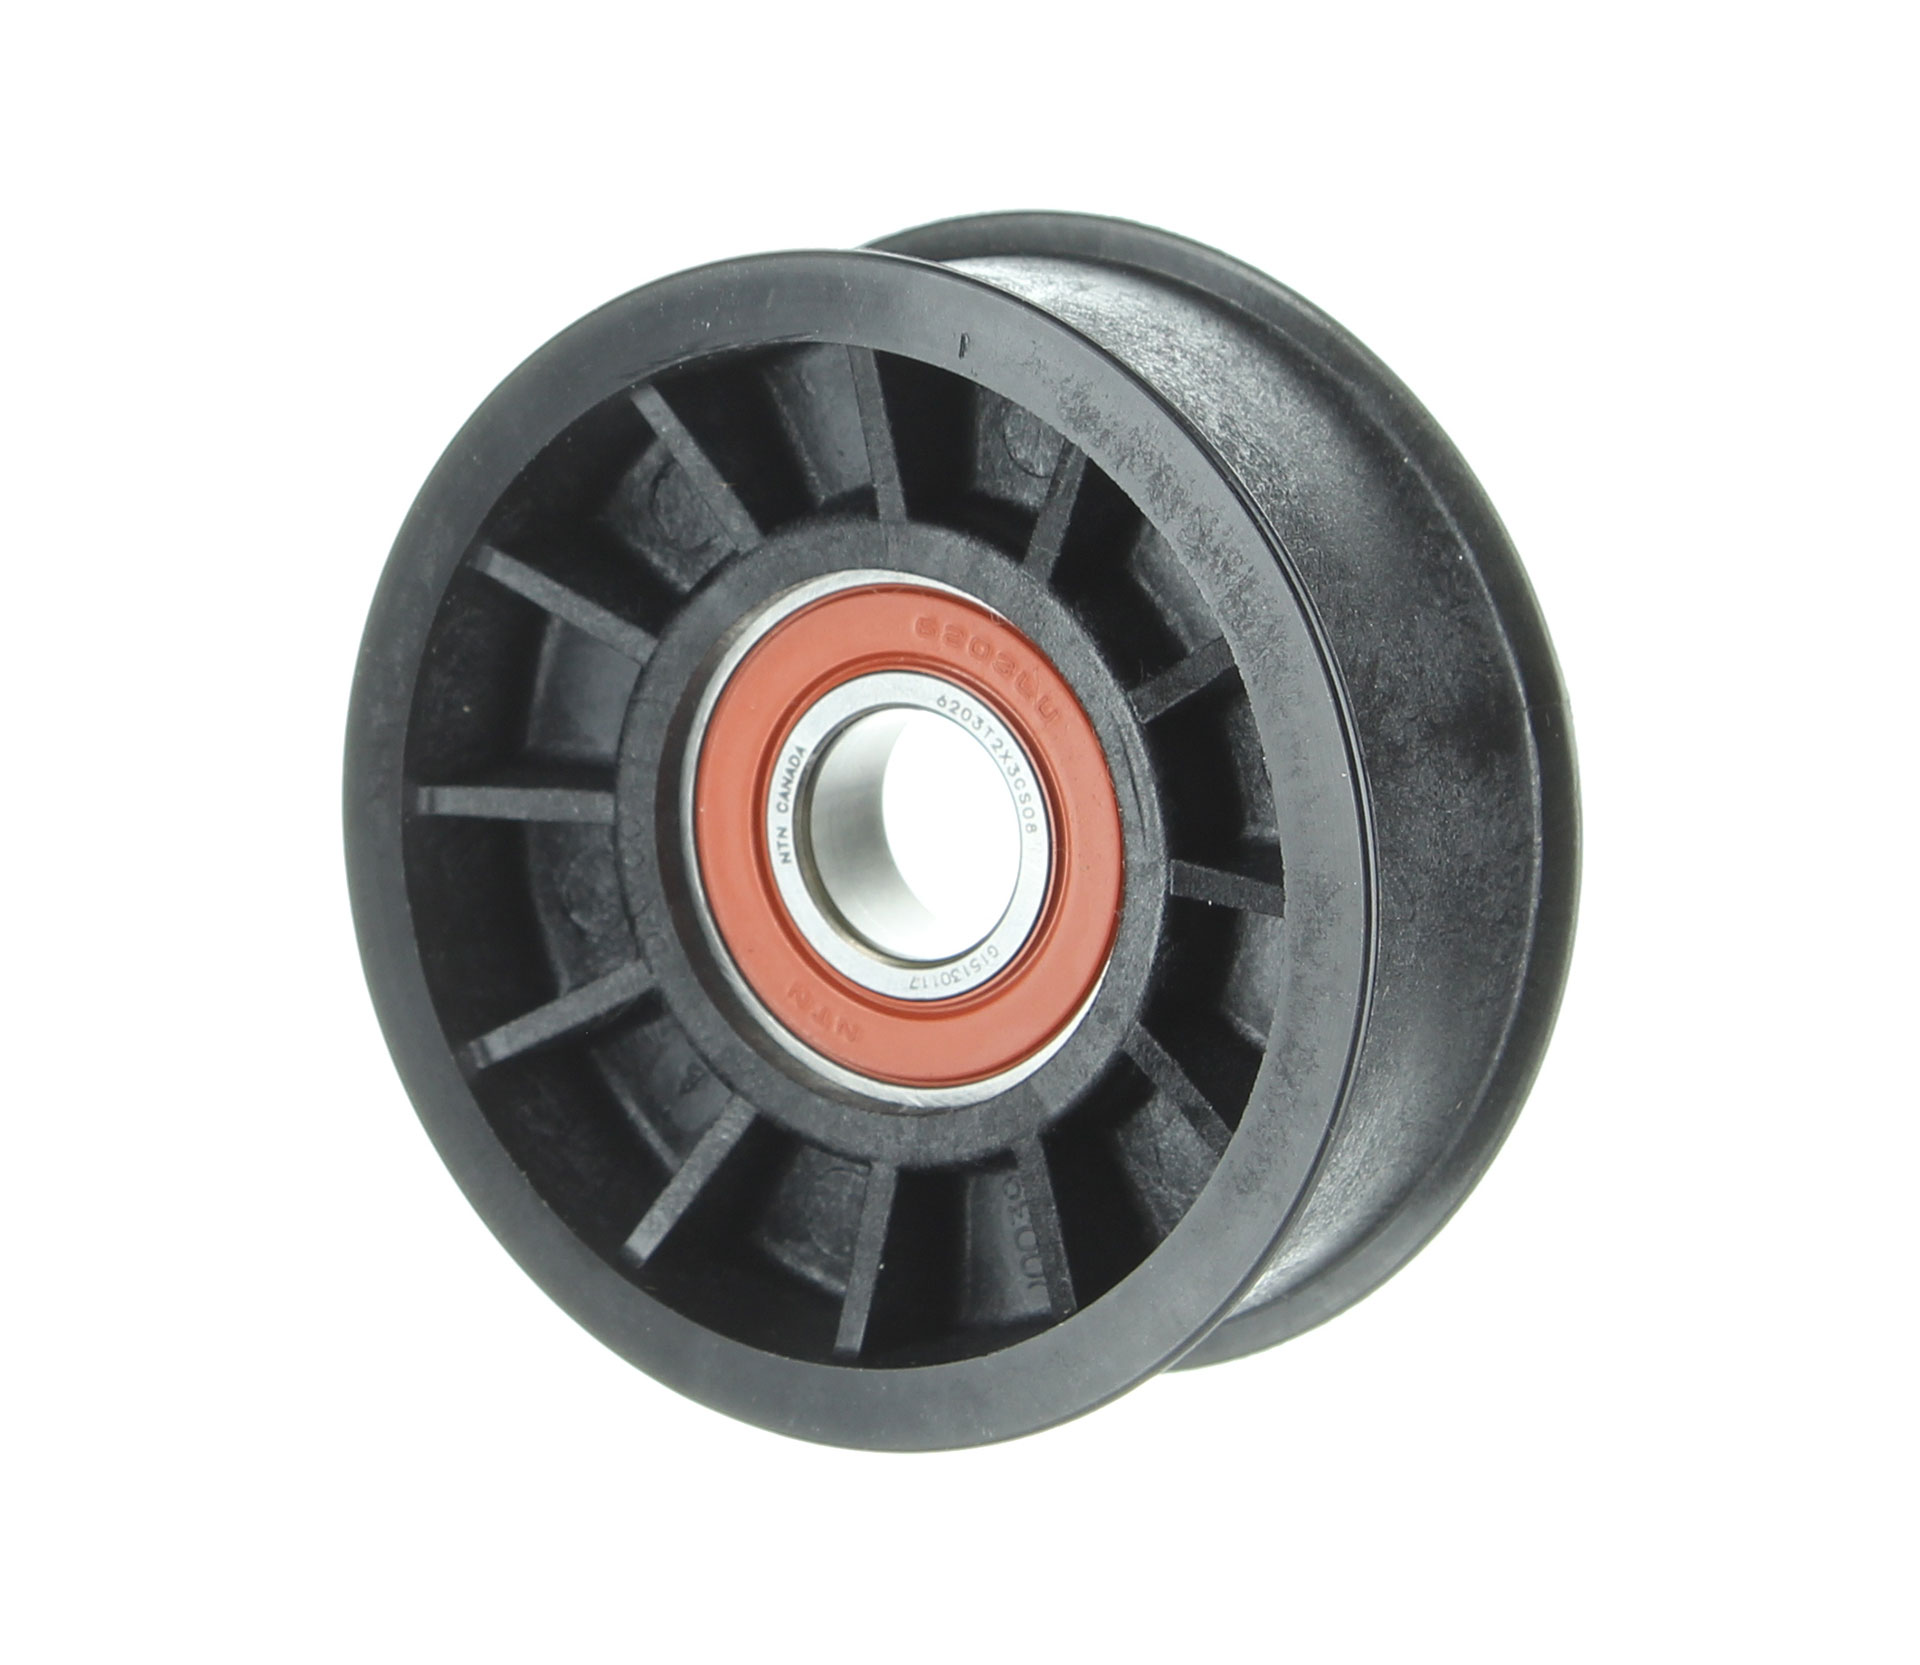 Tensioner Pulley with Lip - PV05821-01